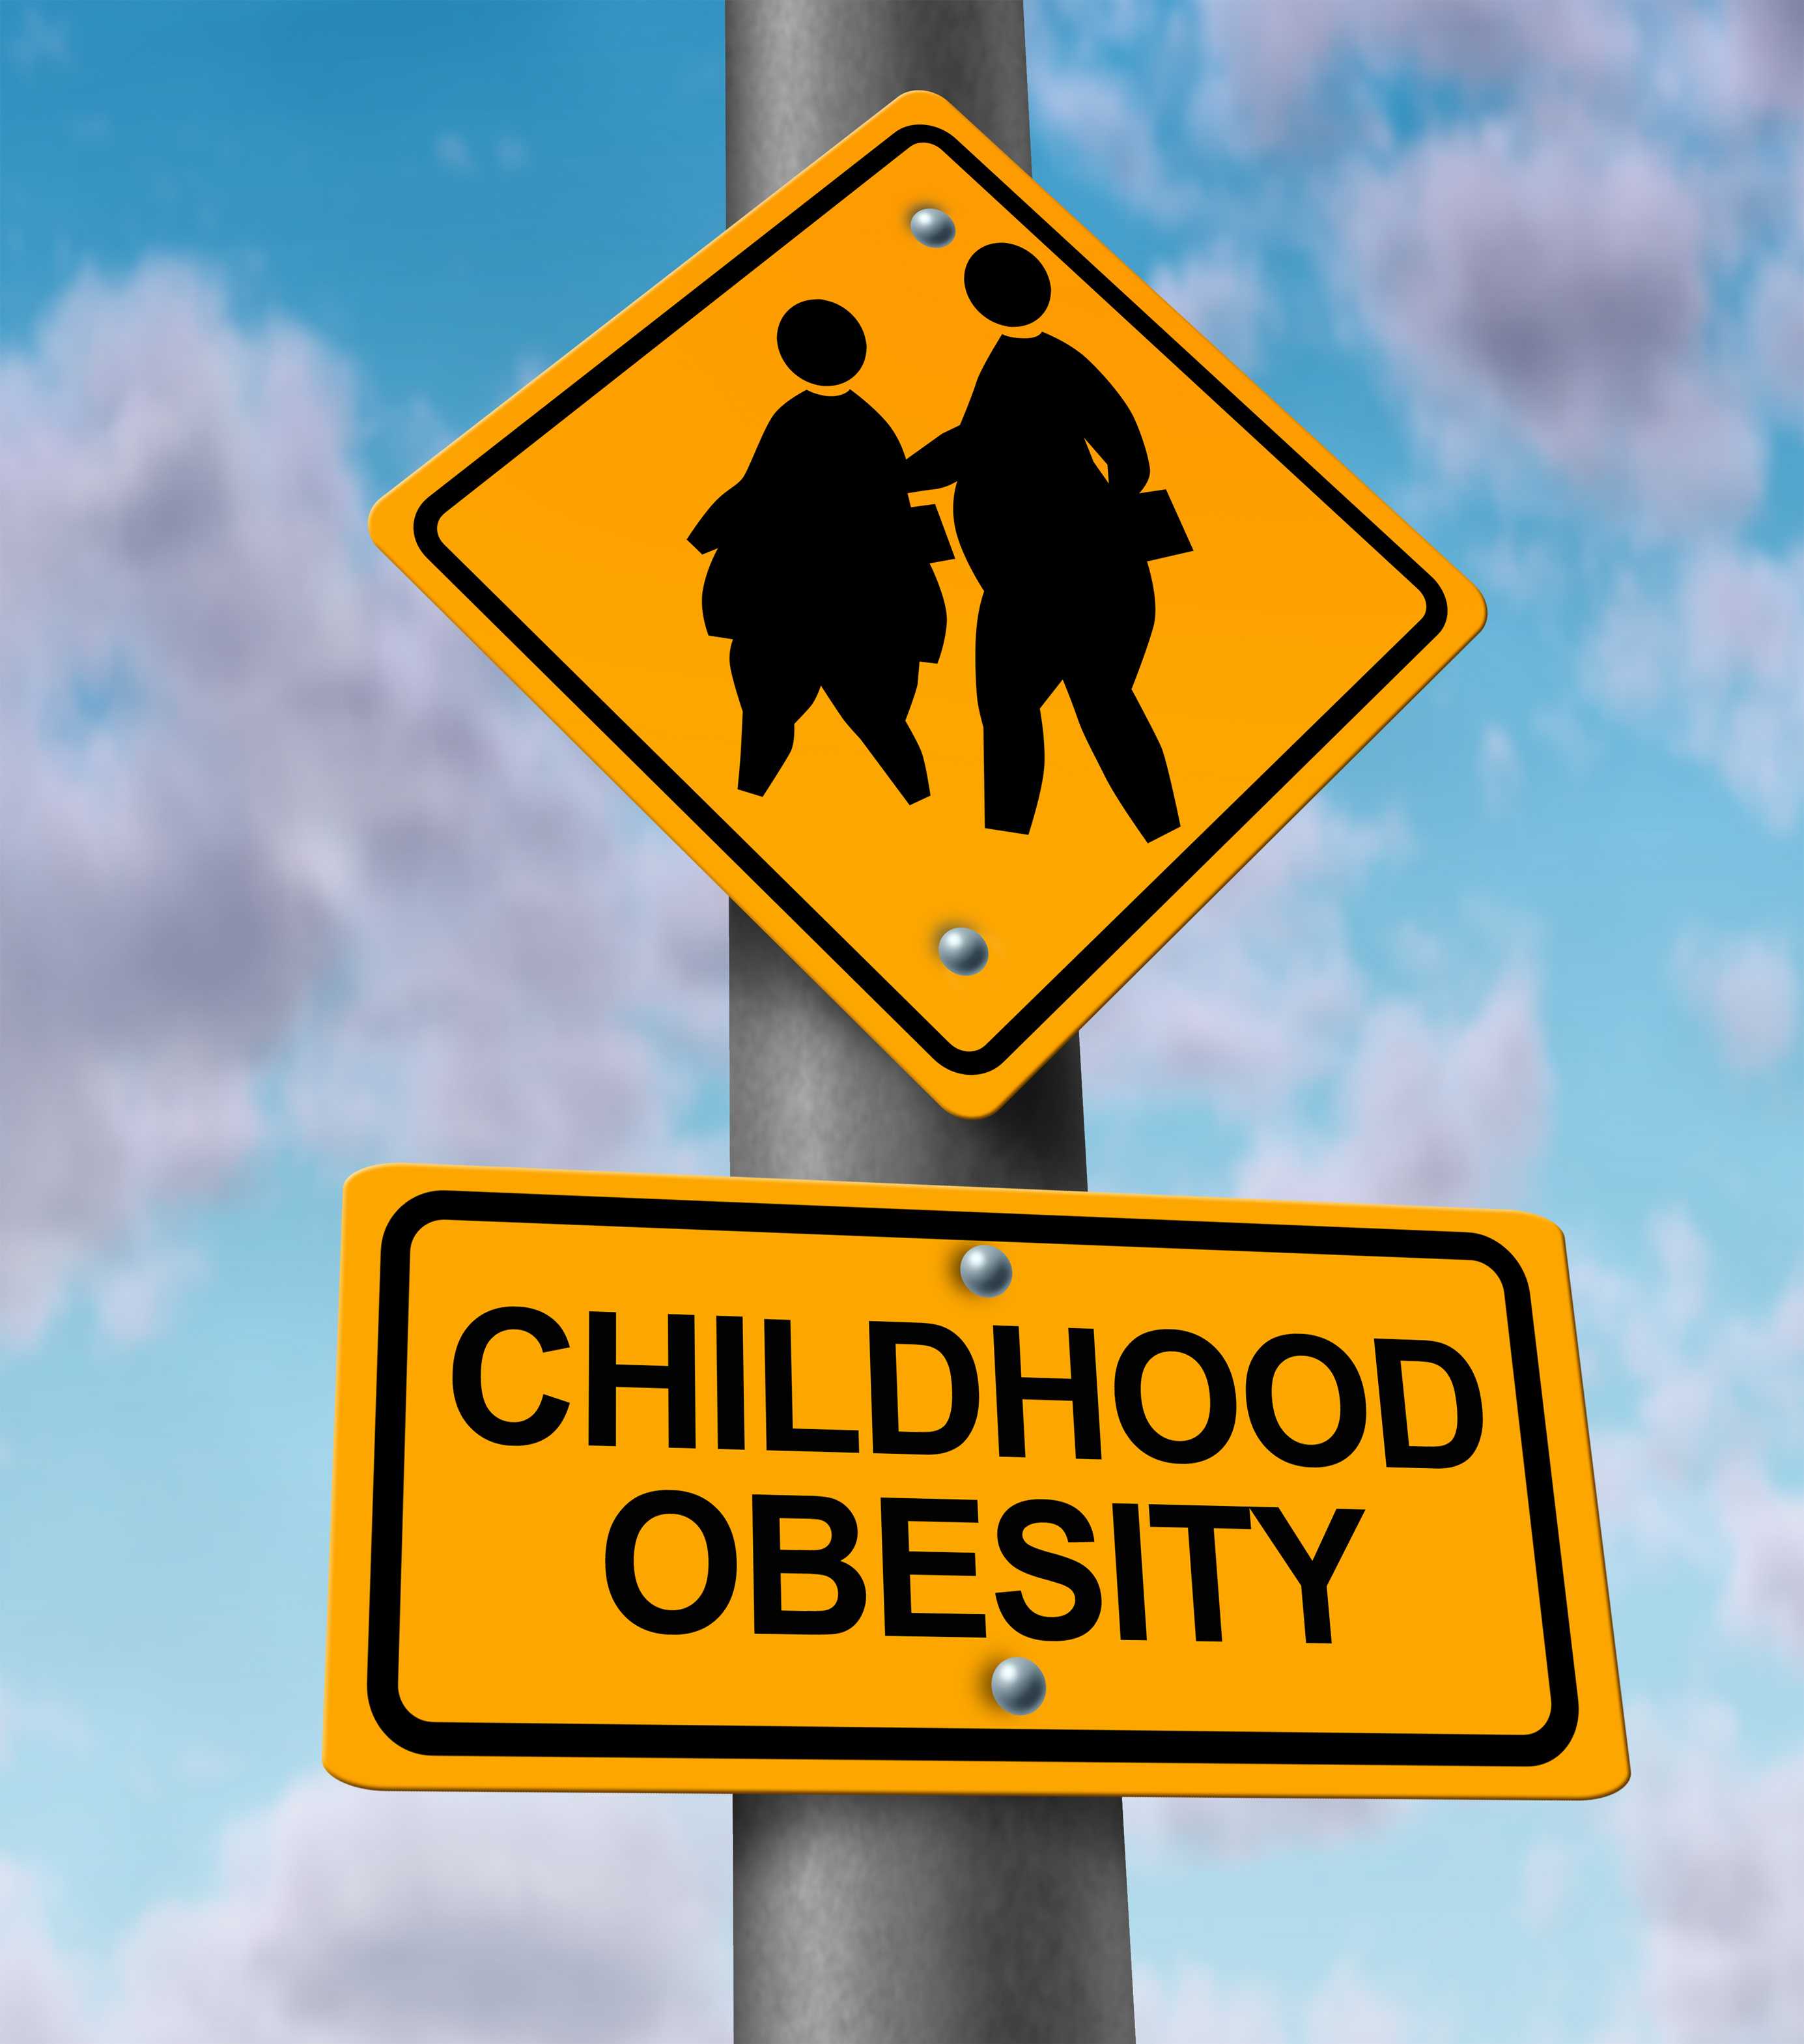 Childhood obesity concept with a traffic road sign showing an icon of overweight kids and young students as a warning to the hazards of eating junk food and fatty fast food.